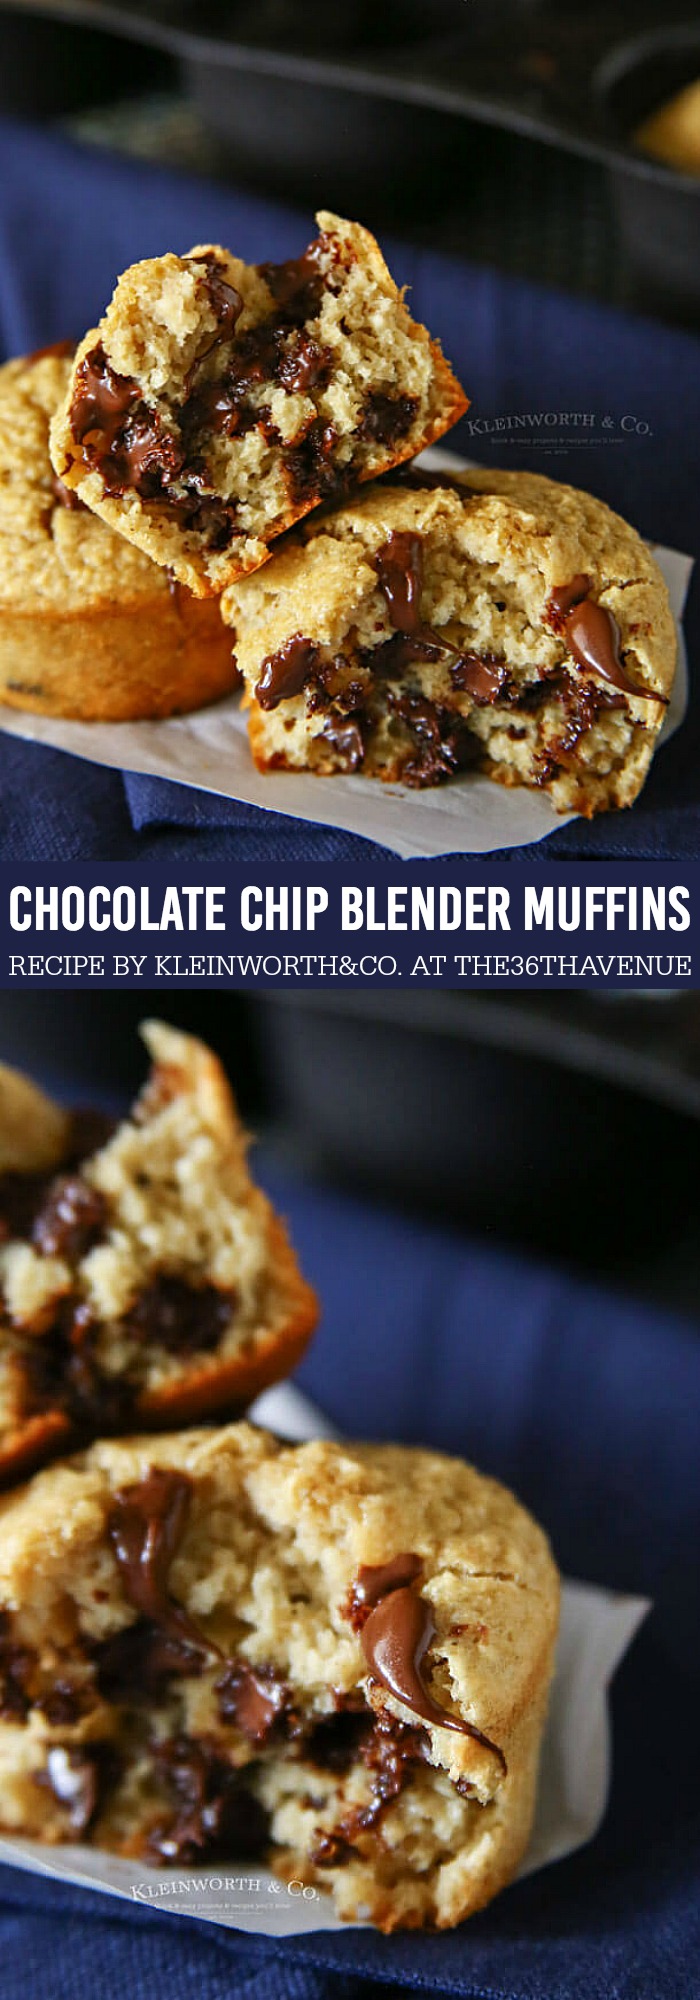 Chocolate Chip Blender Muffins at the36thavenue.com